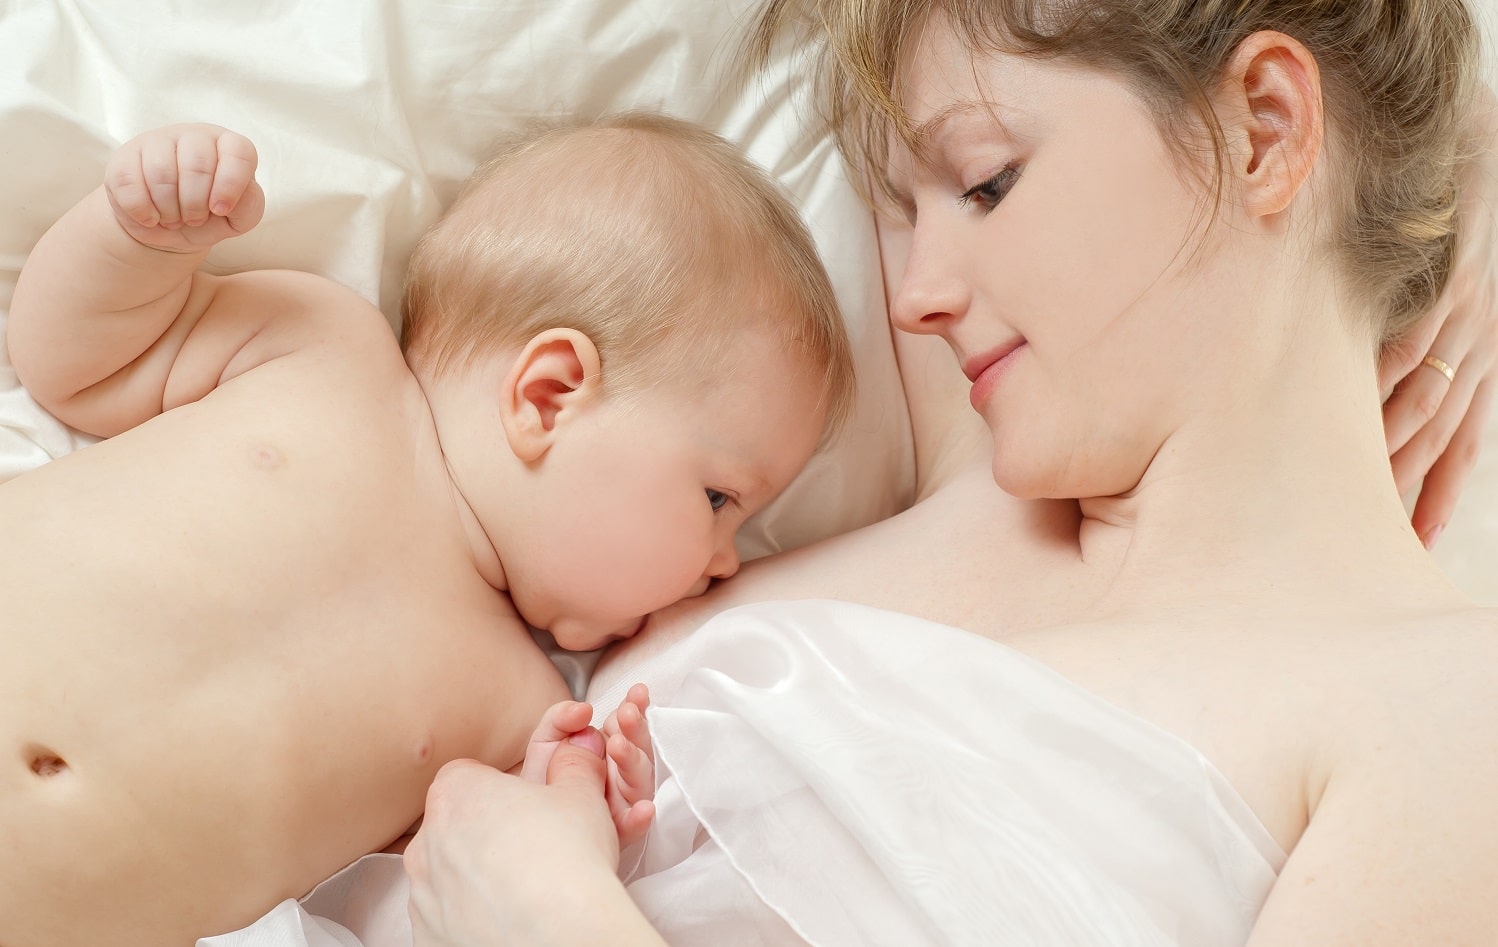 advantages of breastfeeding for your baby - Advantages of breastfeeding for your baby